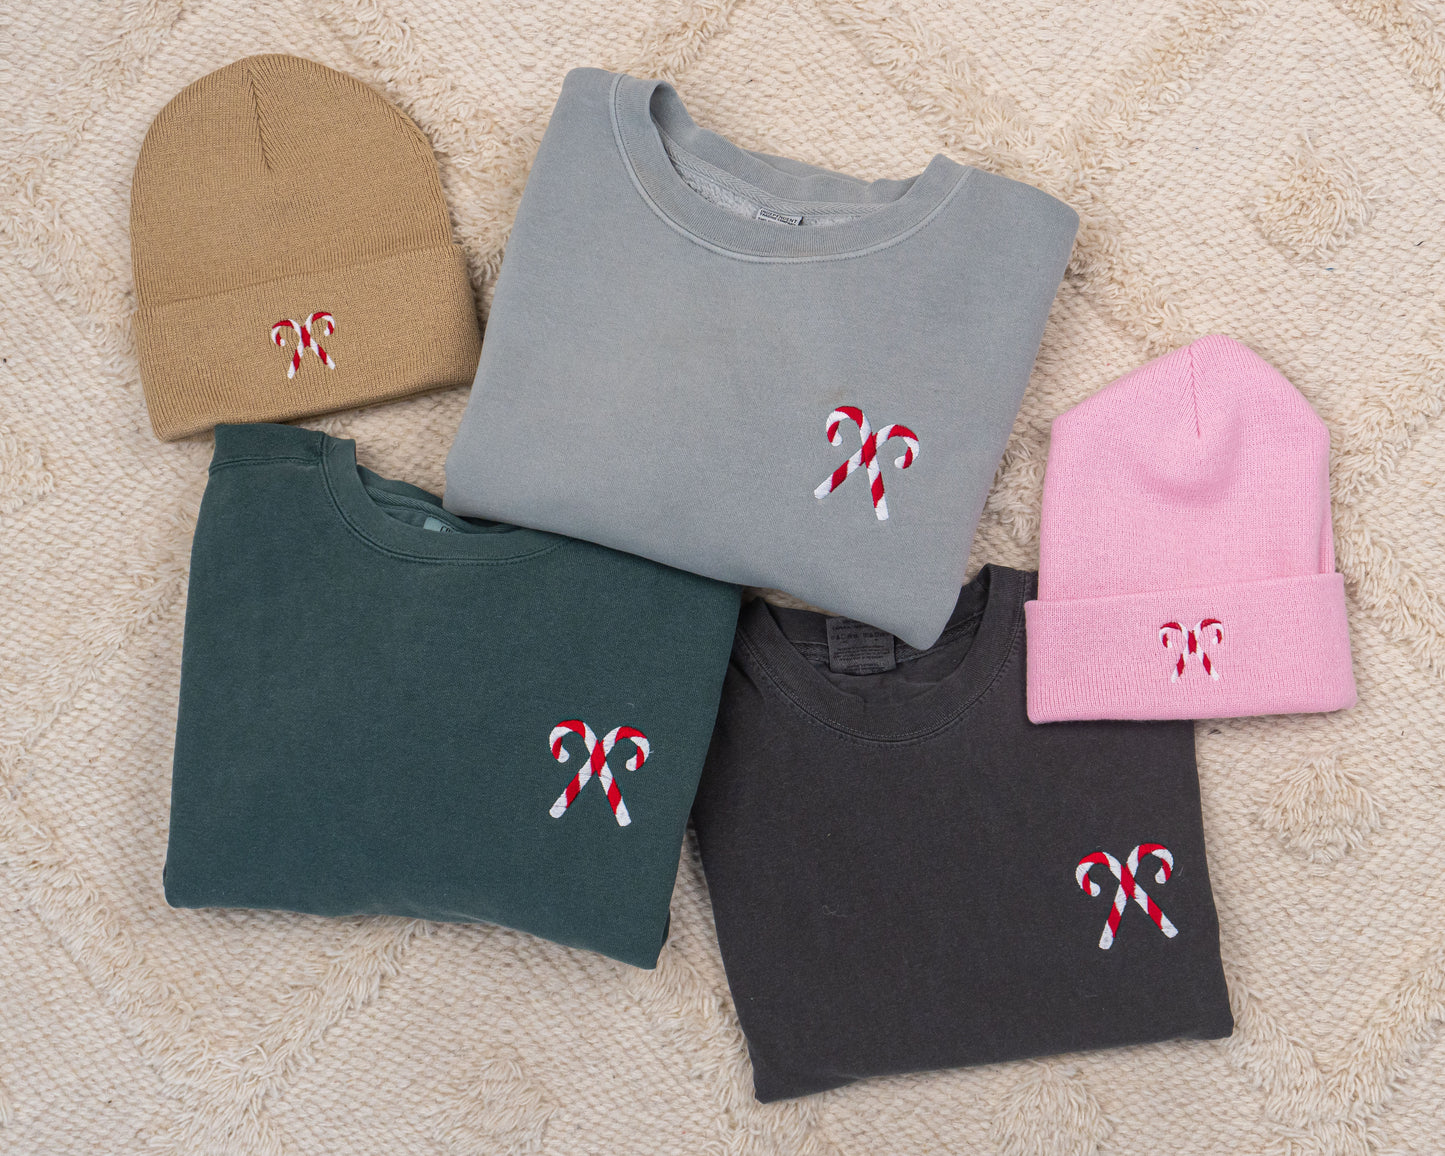 Candy Canes (Pocket) - Embroidered Sweatshirt (Blue Spruce)